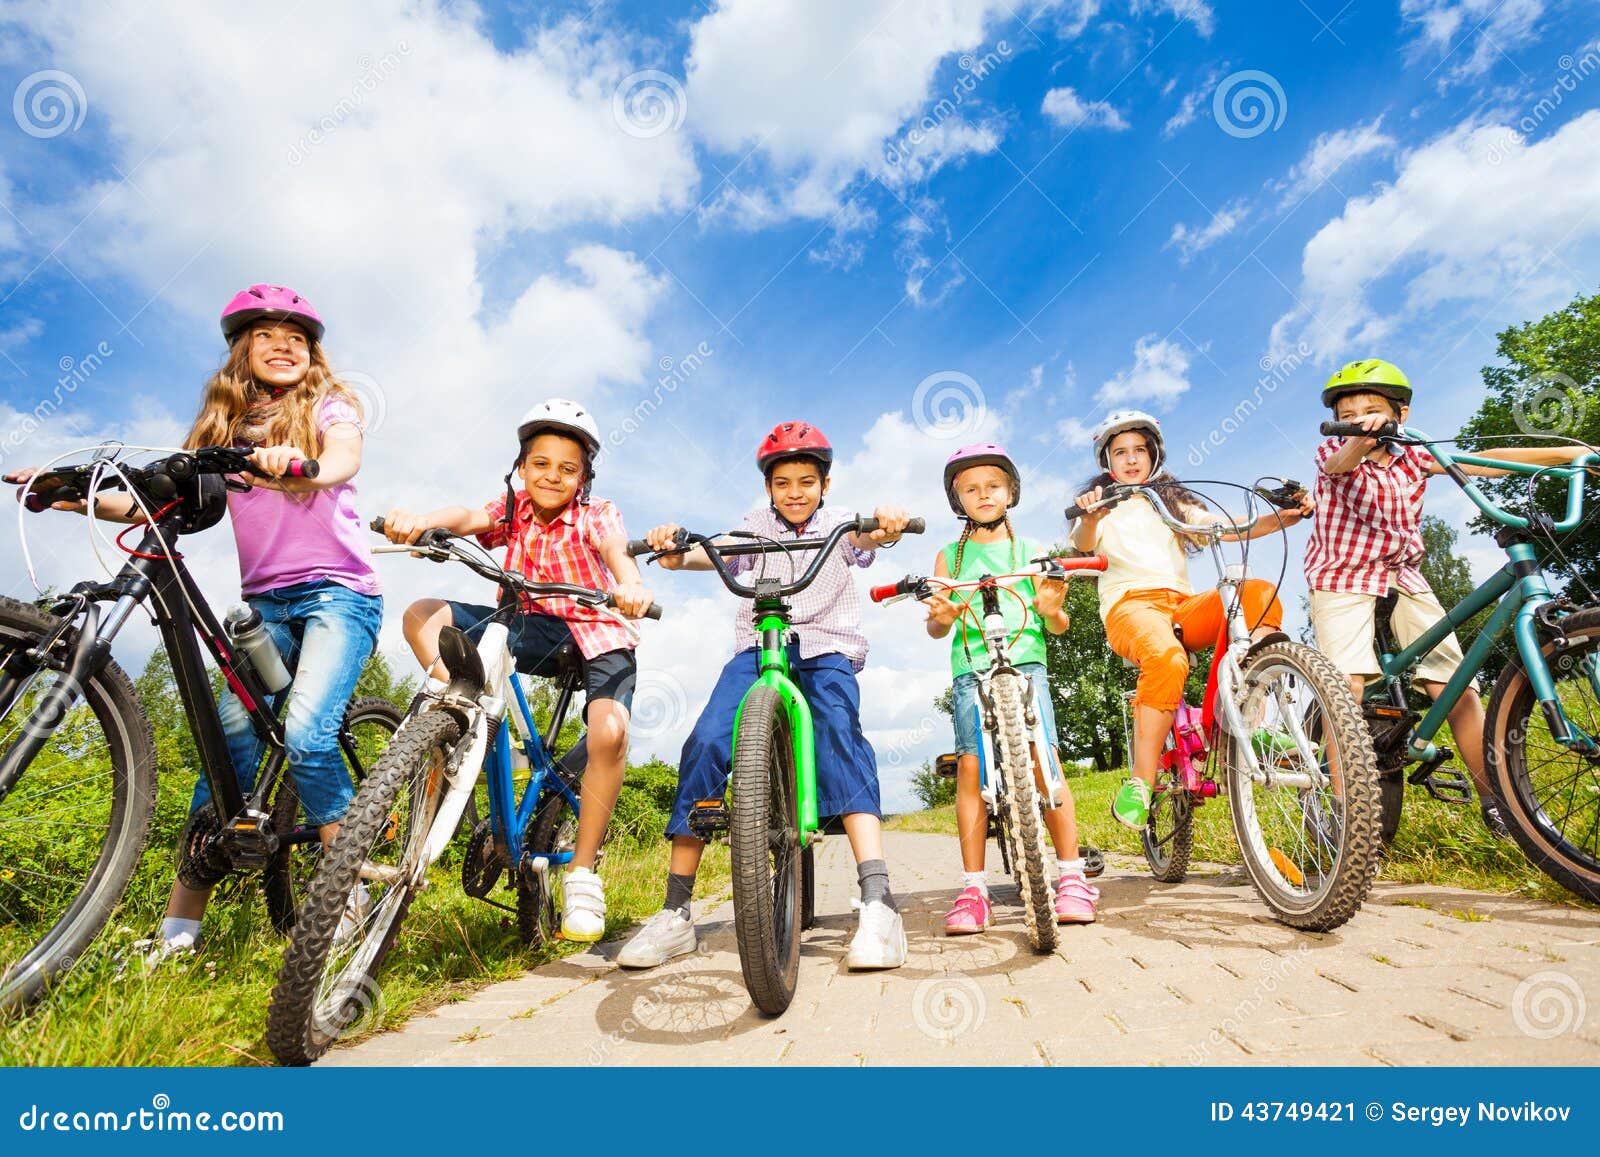 below angle view of kids in helmets with bikes